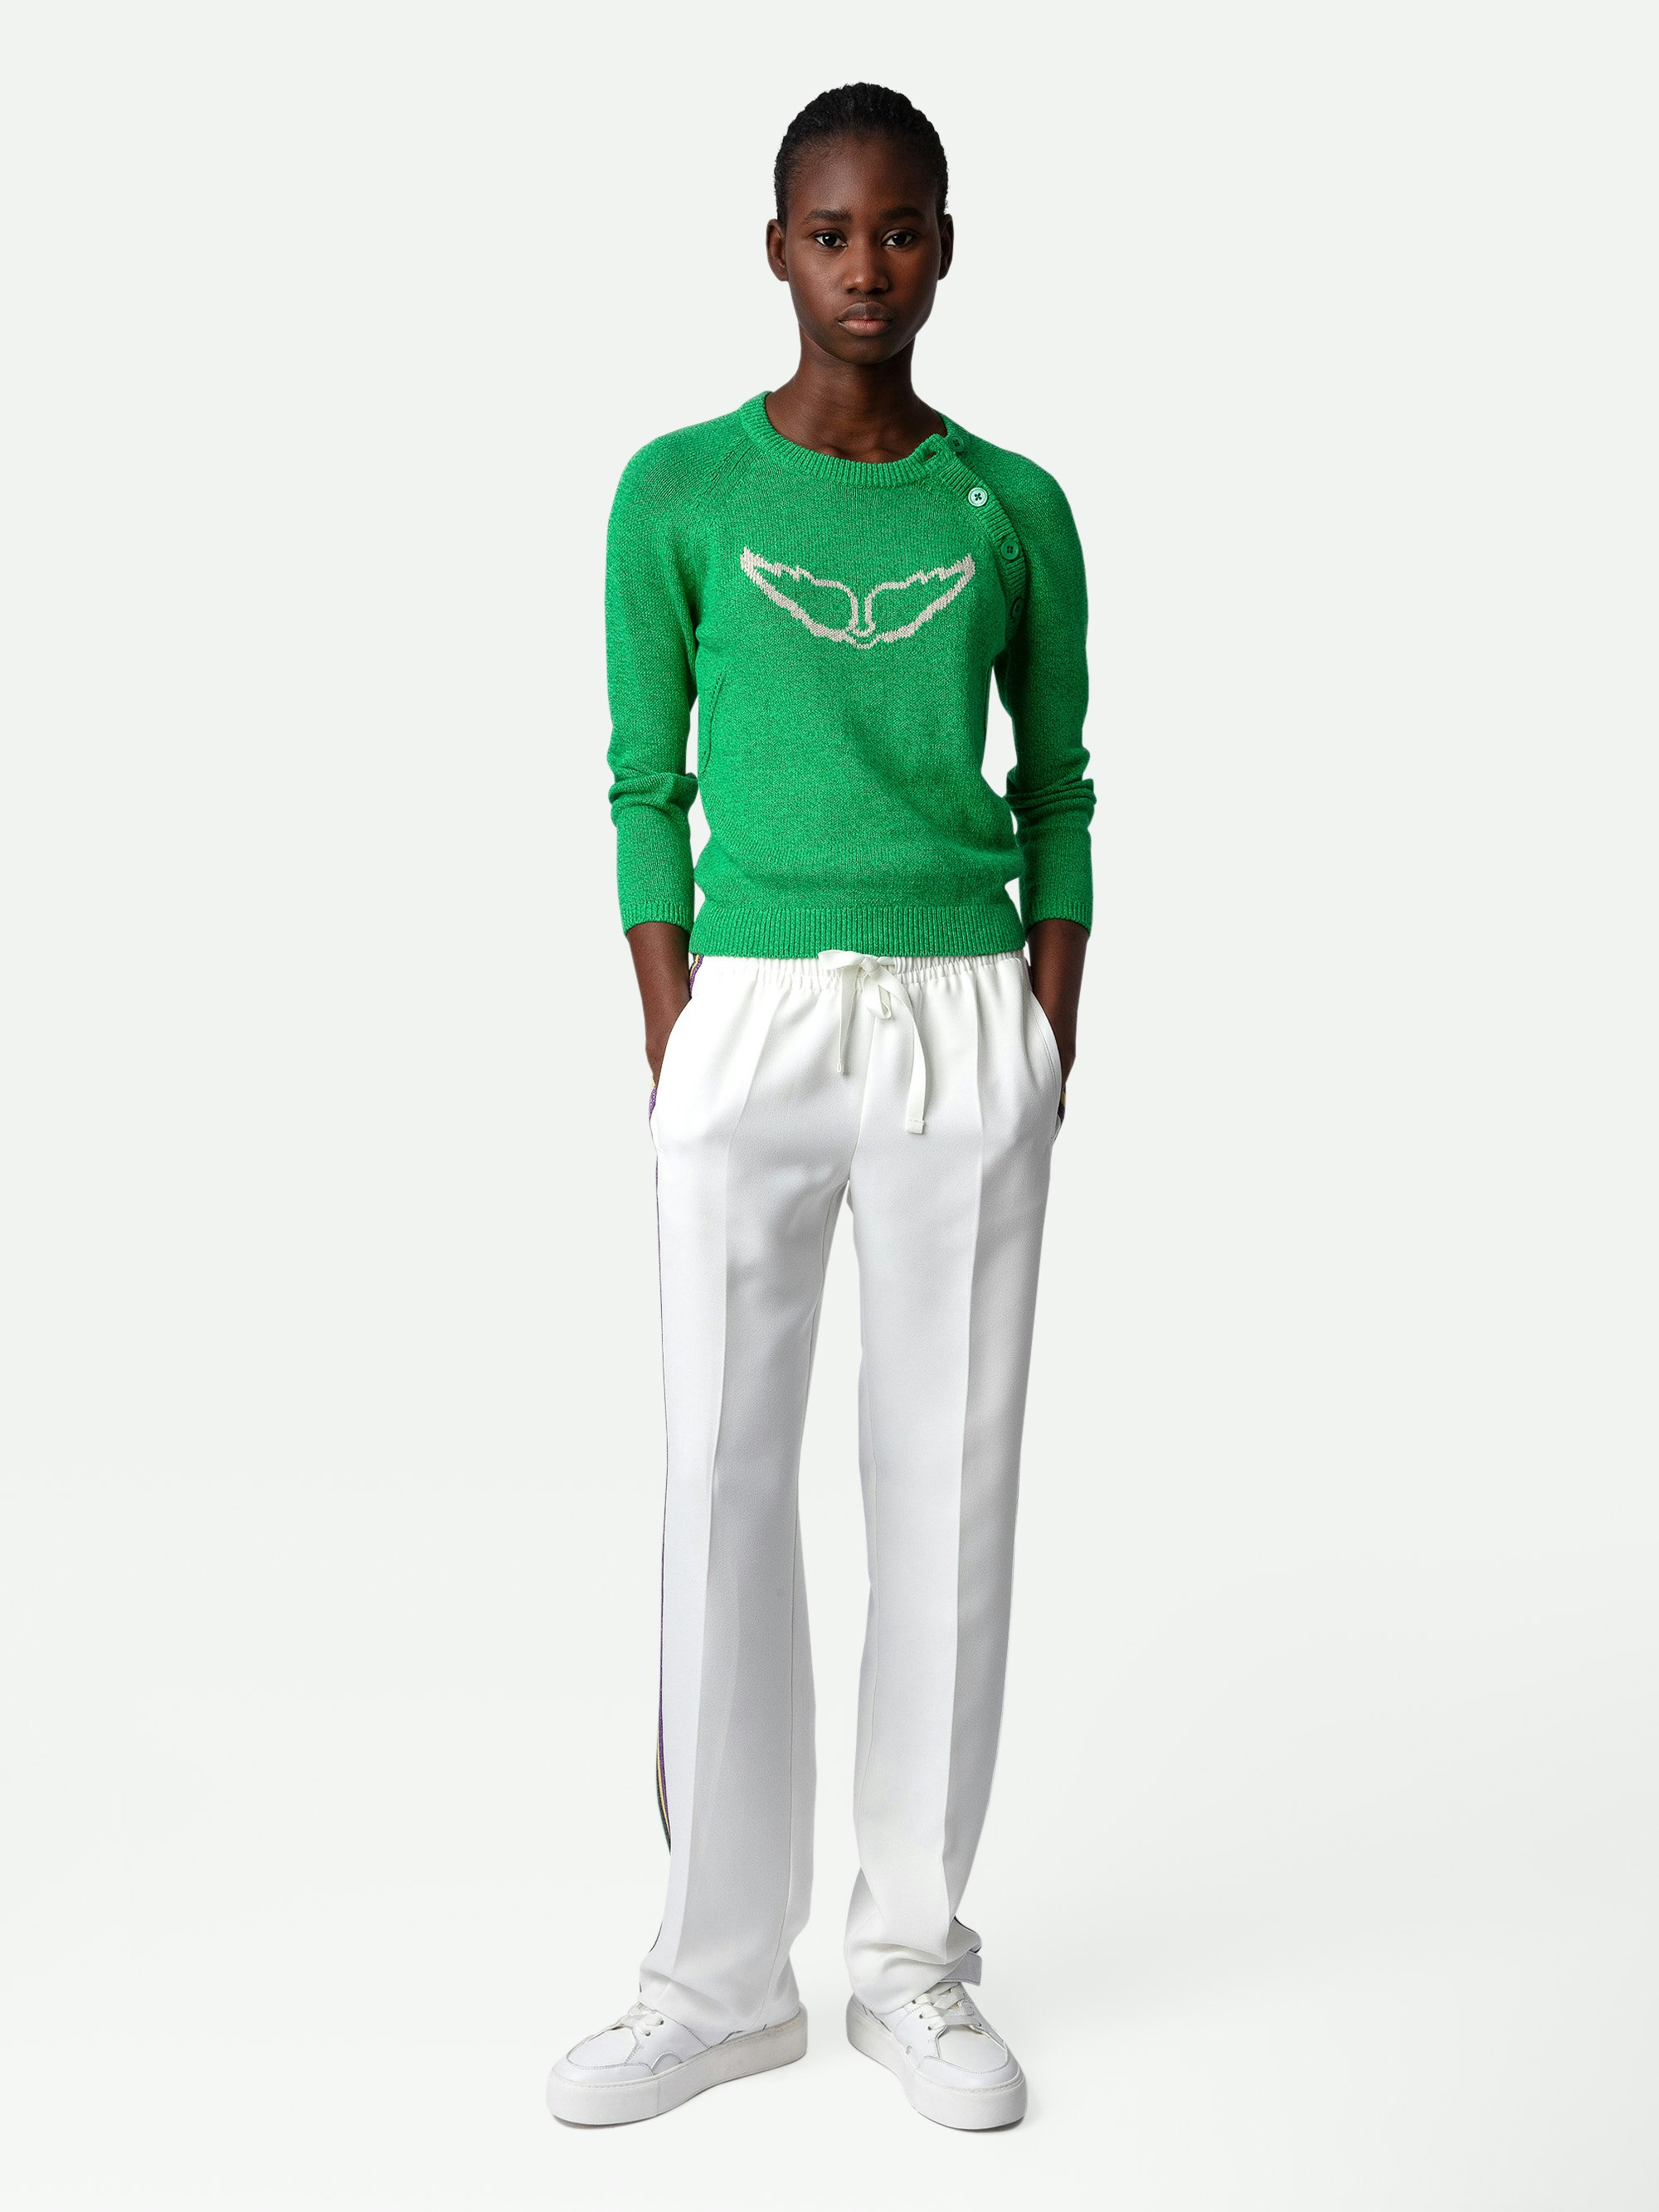 Regliss Wings Jumper - Green linen cropped jumper with button closure and intarsia jacquard wings.